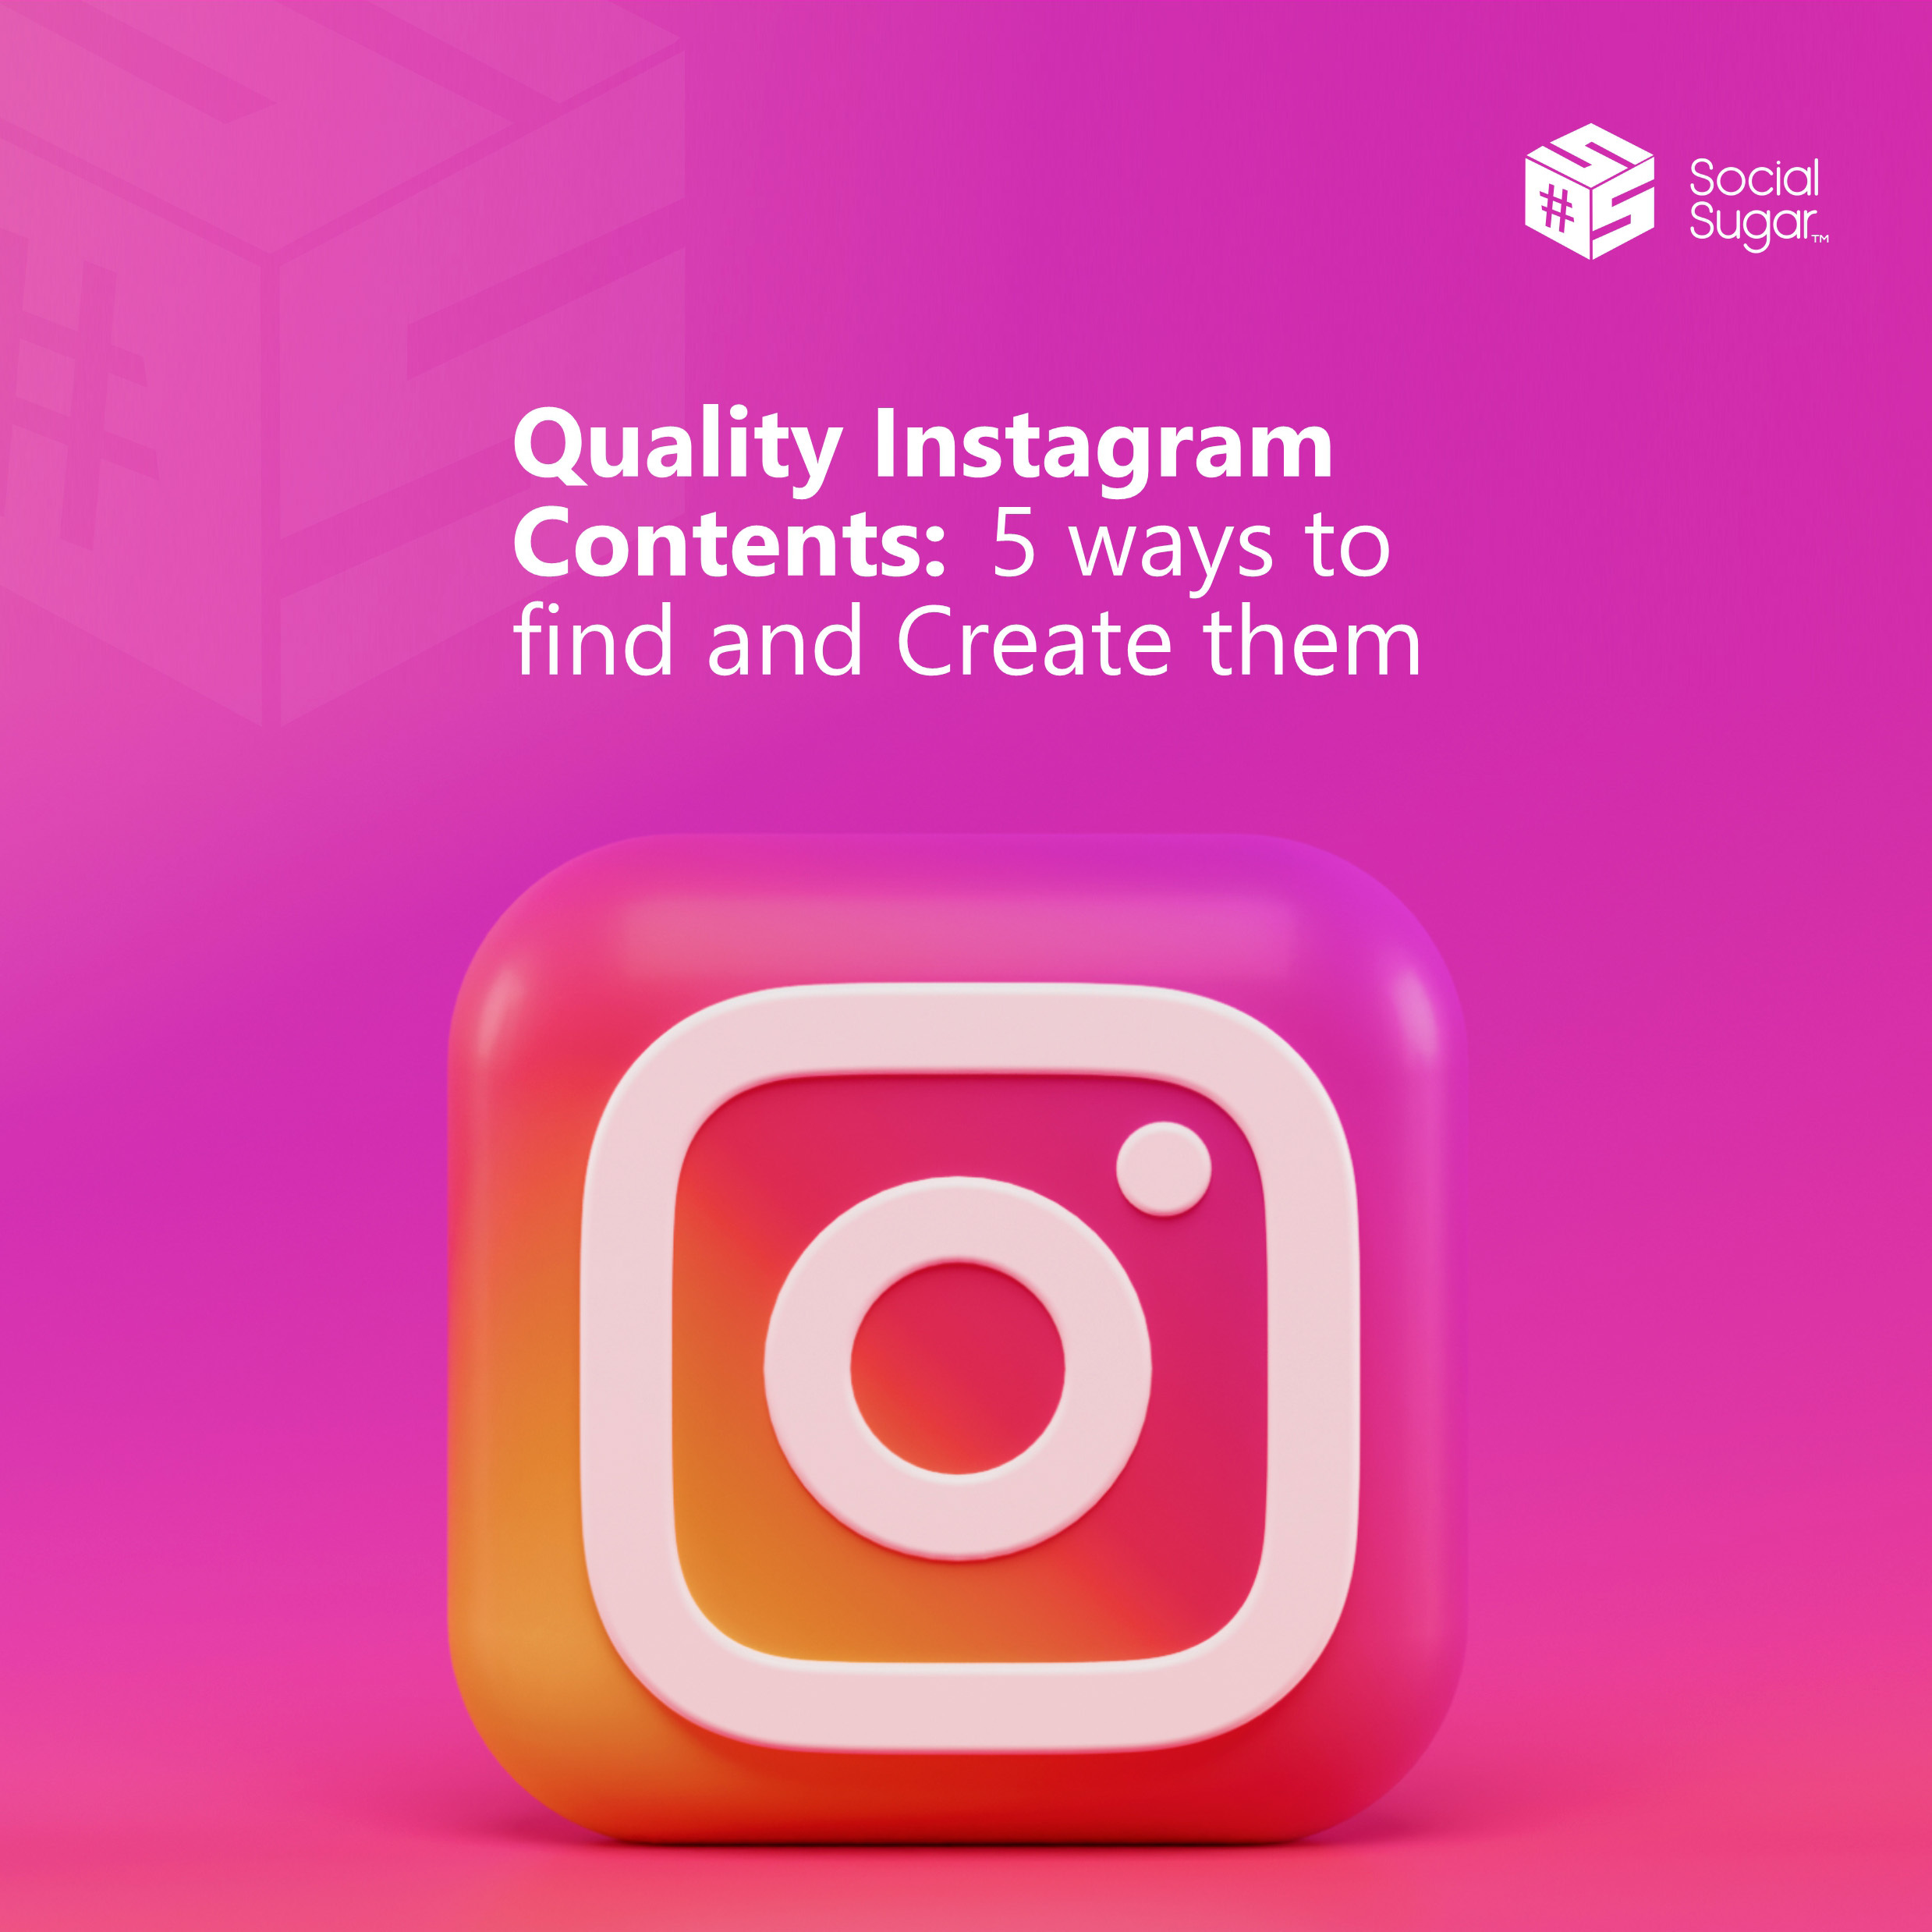 Quality Instagram Contents: 5 Ways To Find And Create Them